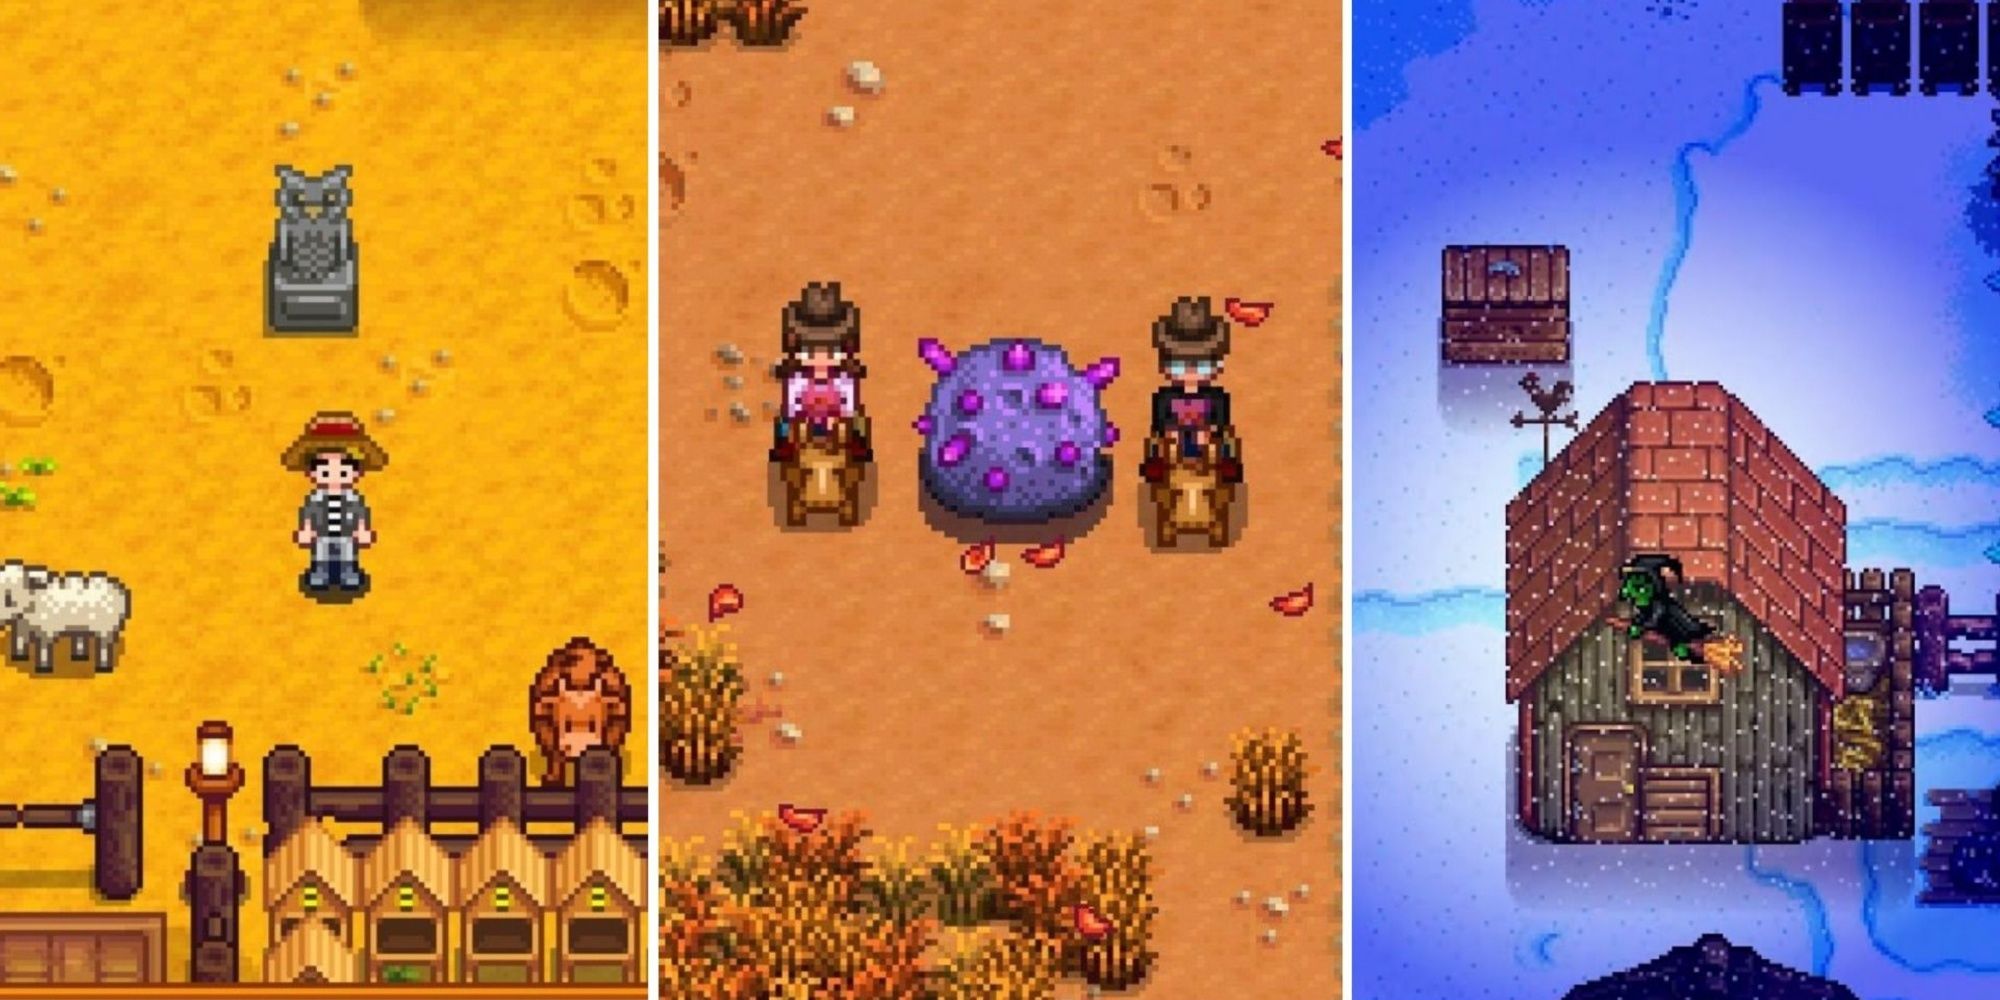 Stardew Valley split image of player standing next to Stone Owl, two farmers standing next to purple meteorite, and witch flying over chicken coop